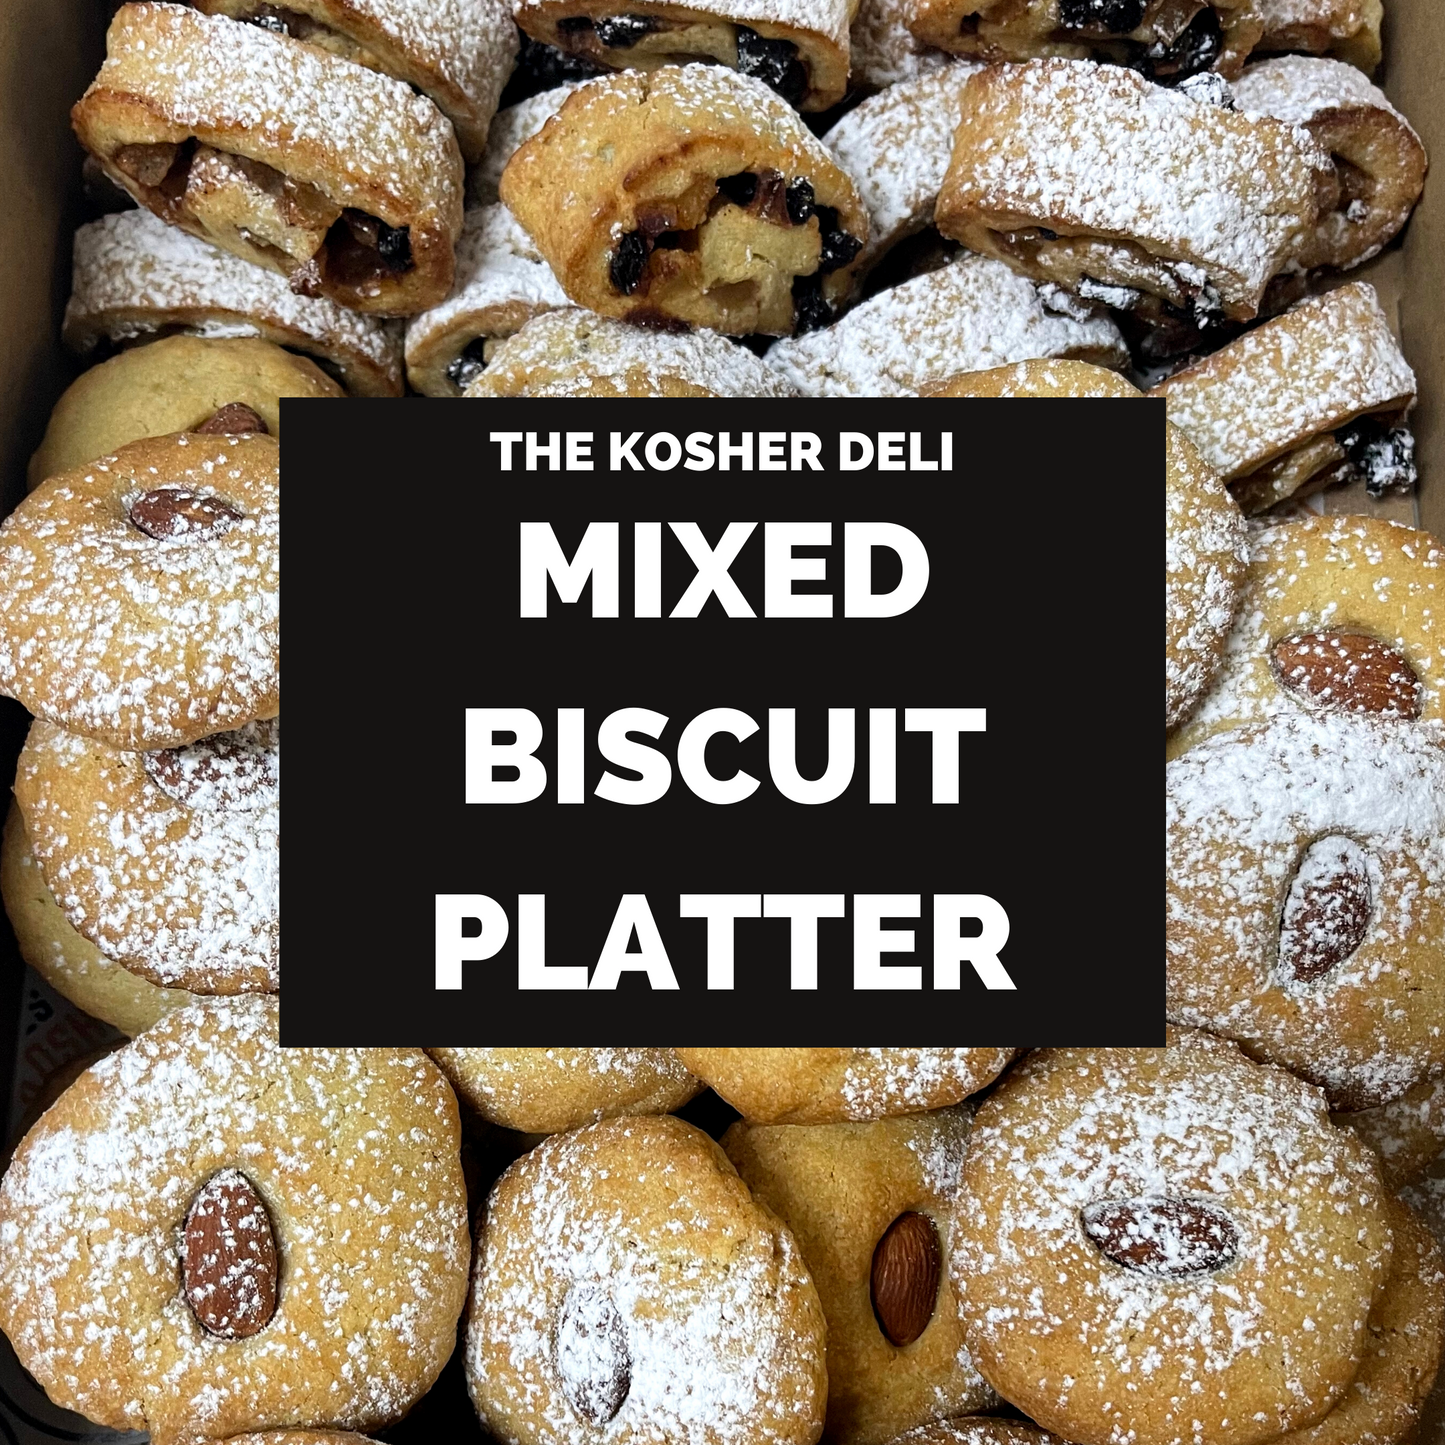 Mixed biscuit platter - serves 15-20 people